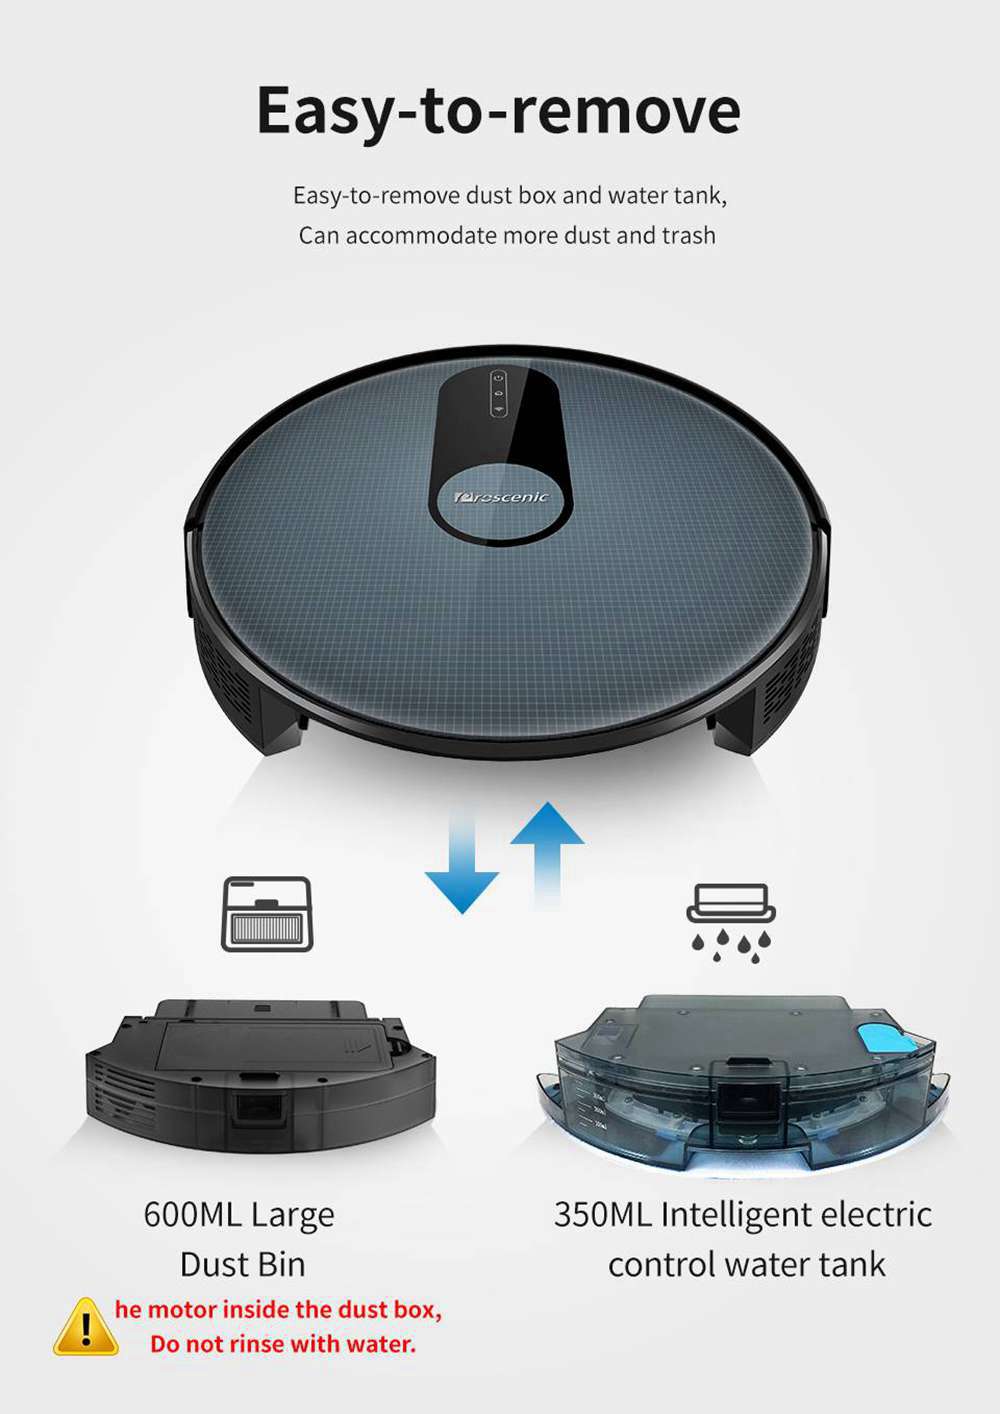 Proscenic 820P Robot Vacuum Cleaner 1800Pa Strong Suction Alexa and APP Control with Wet Cleaning Function - Black